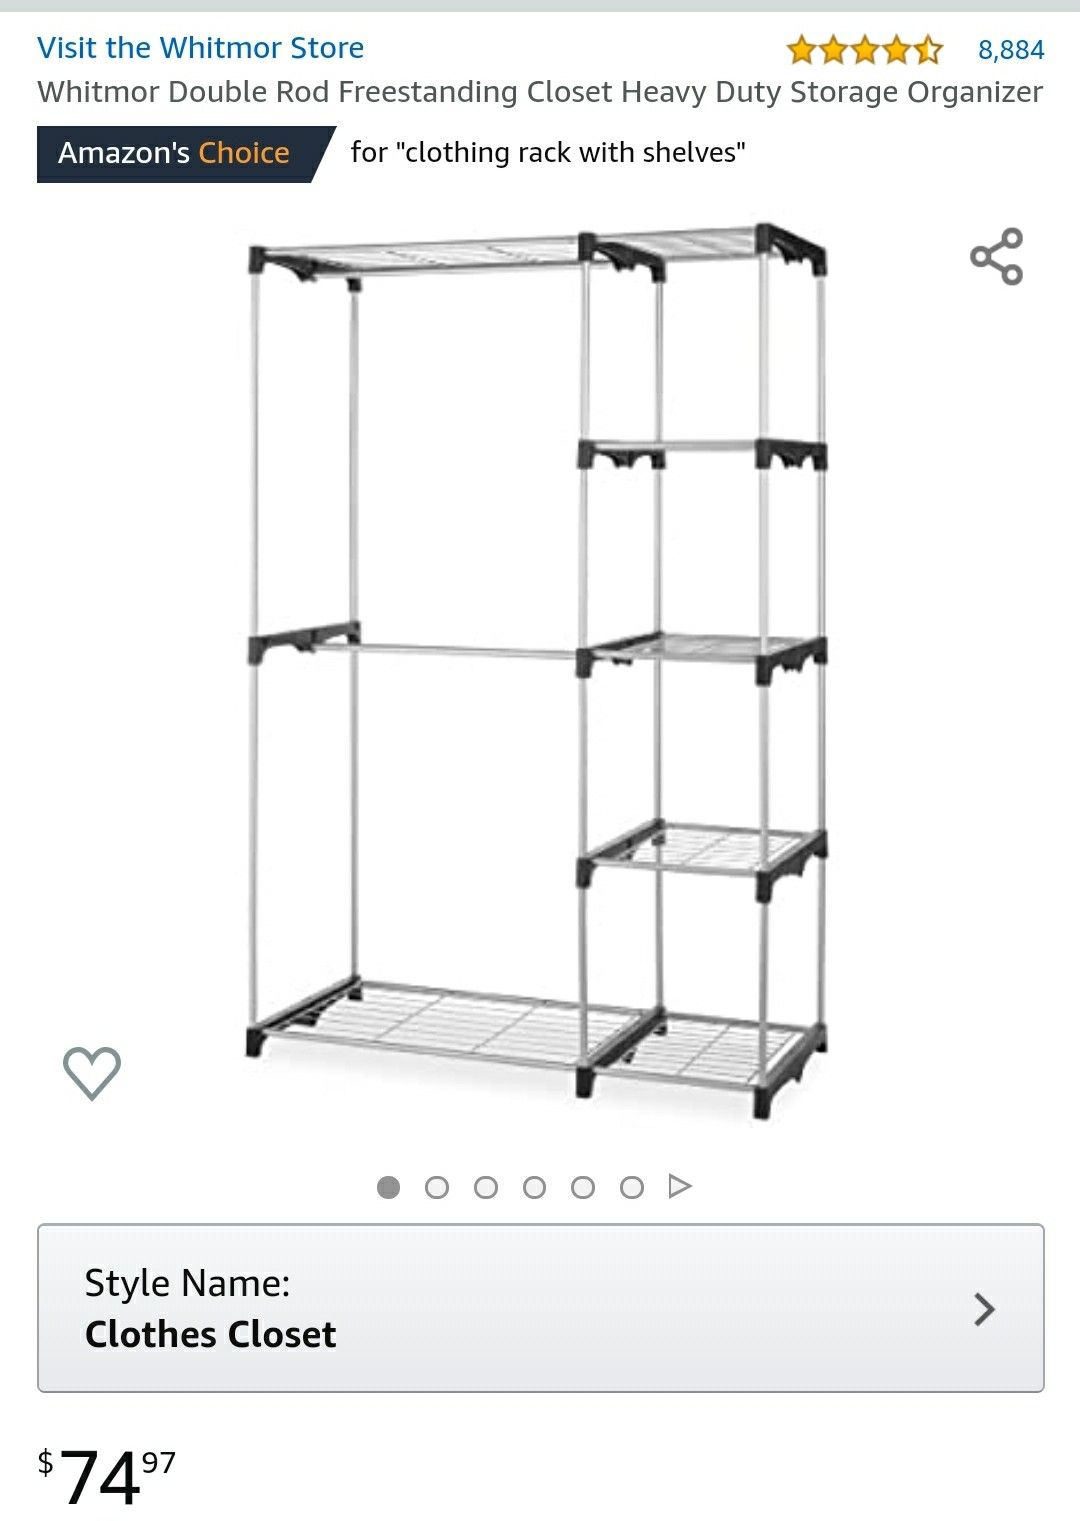 Double rod freestanding closet with shelves